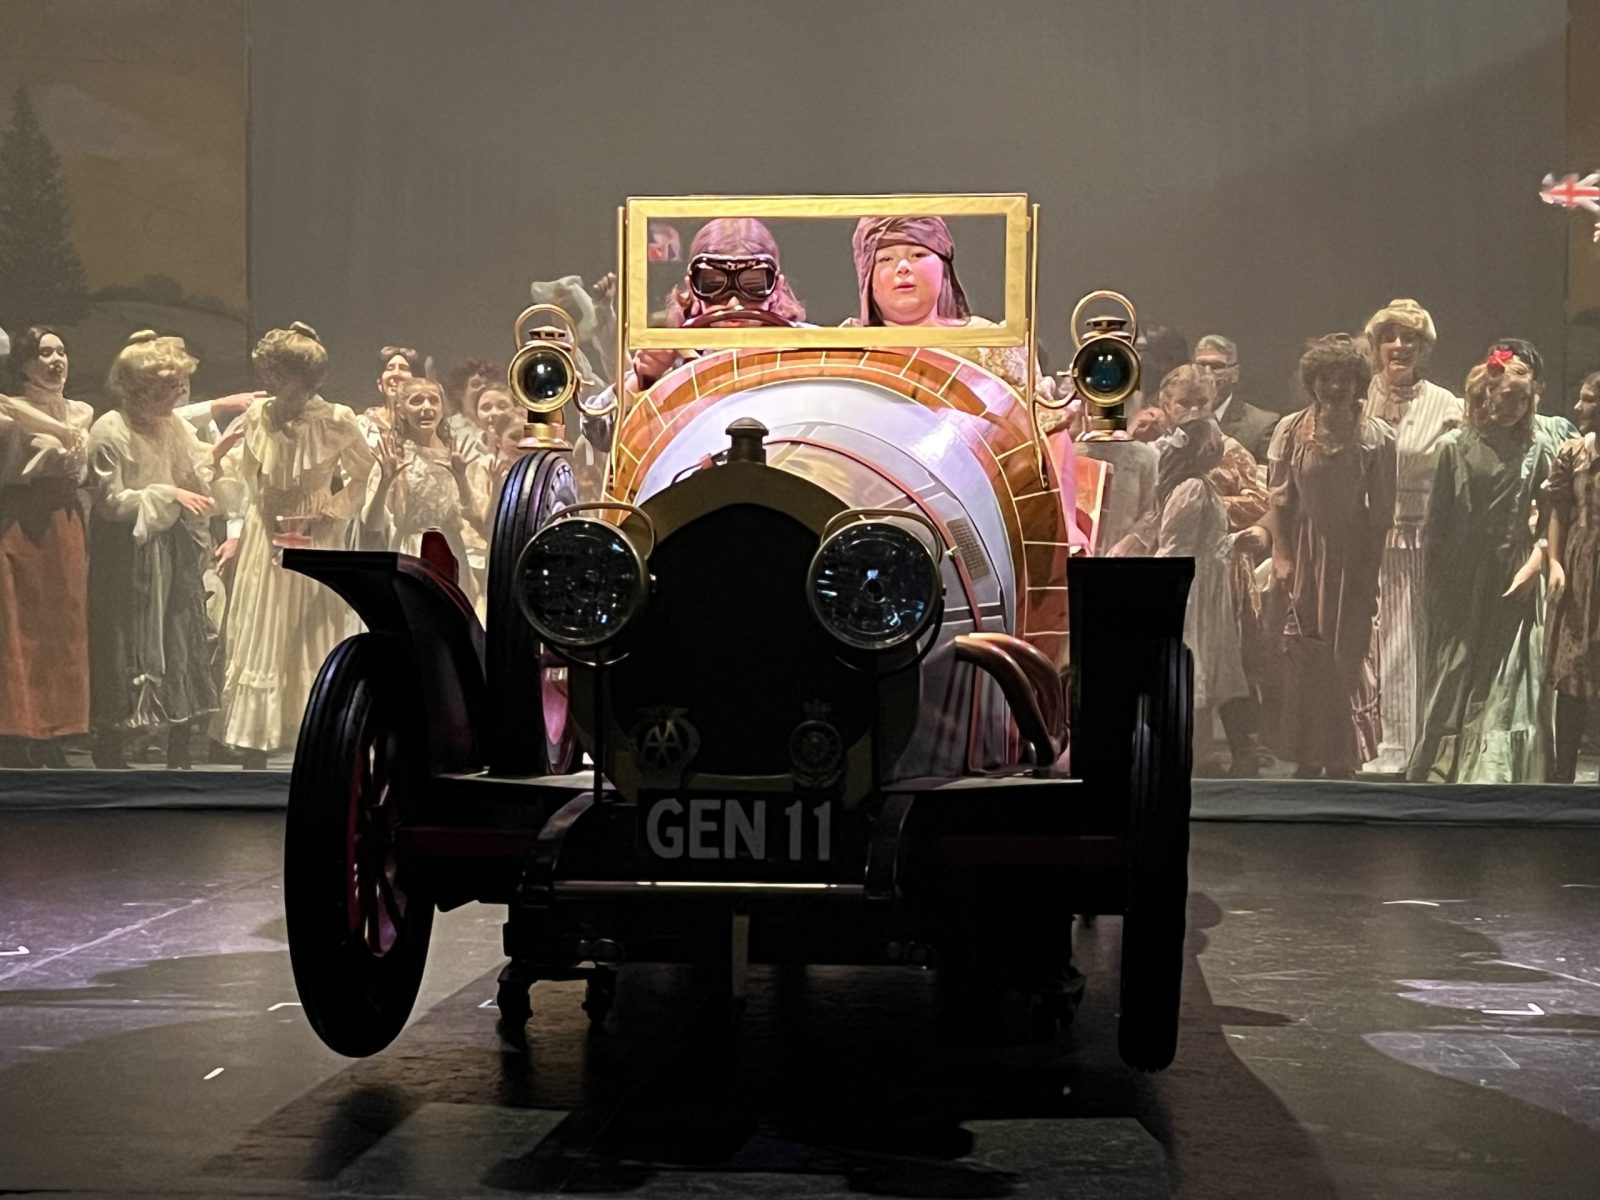 Two children sit inside a car on stage at a theater